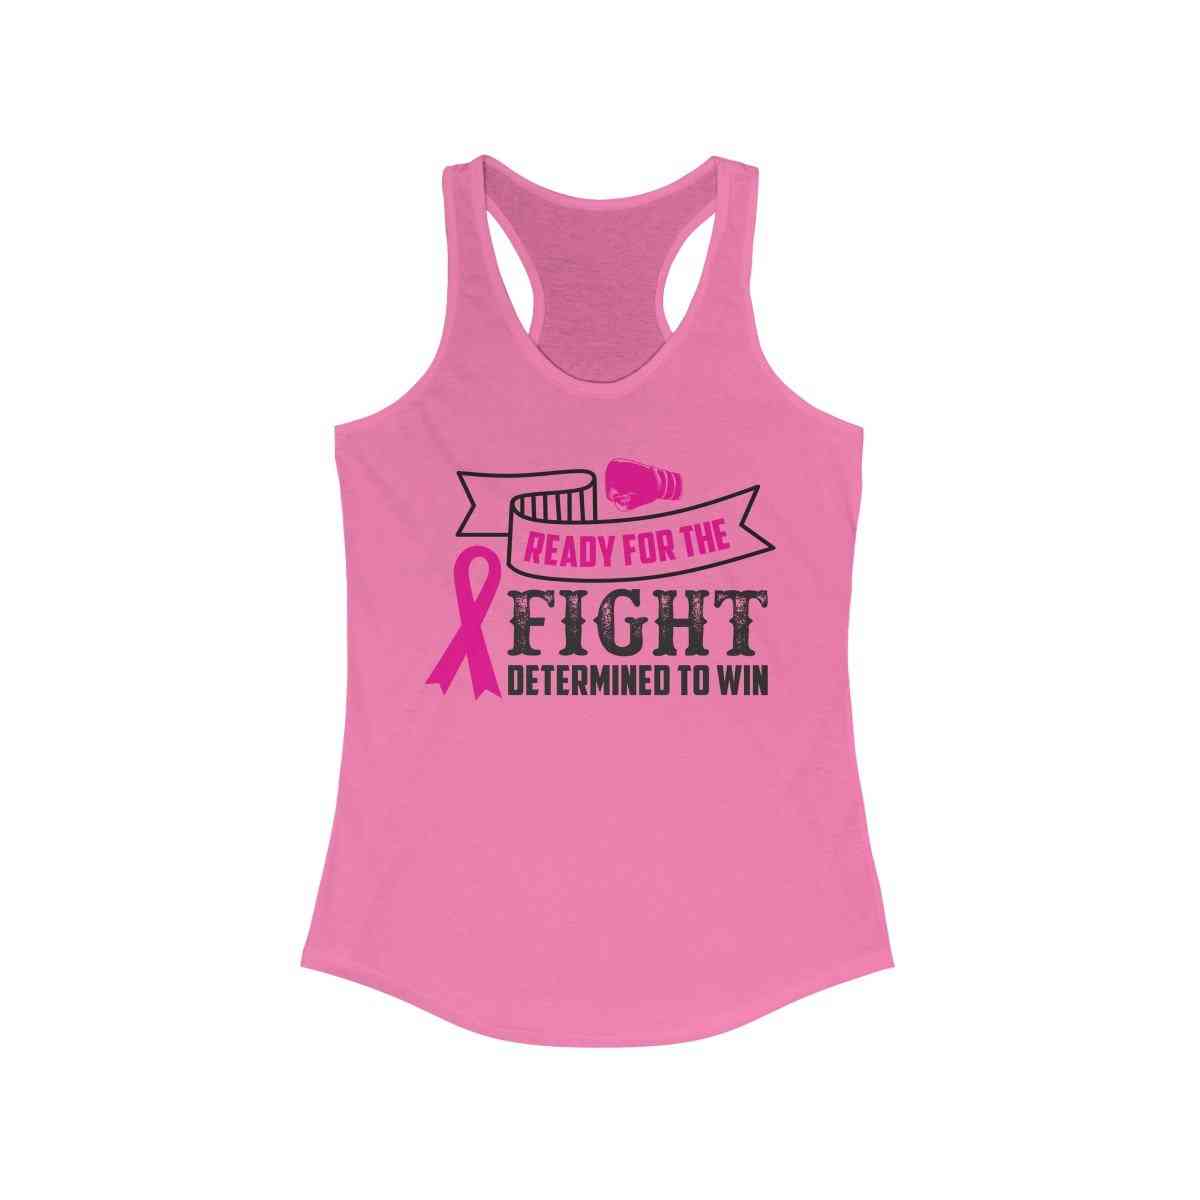 Ready For The Fight, Determined To Win Racerback, Tank Top